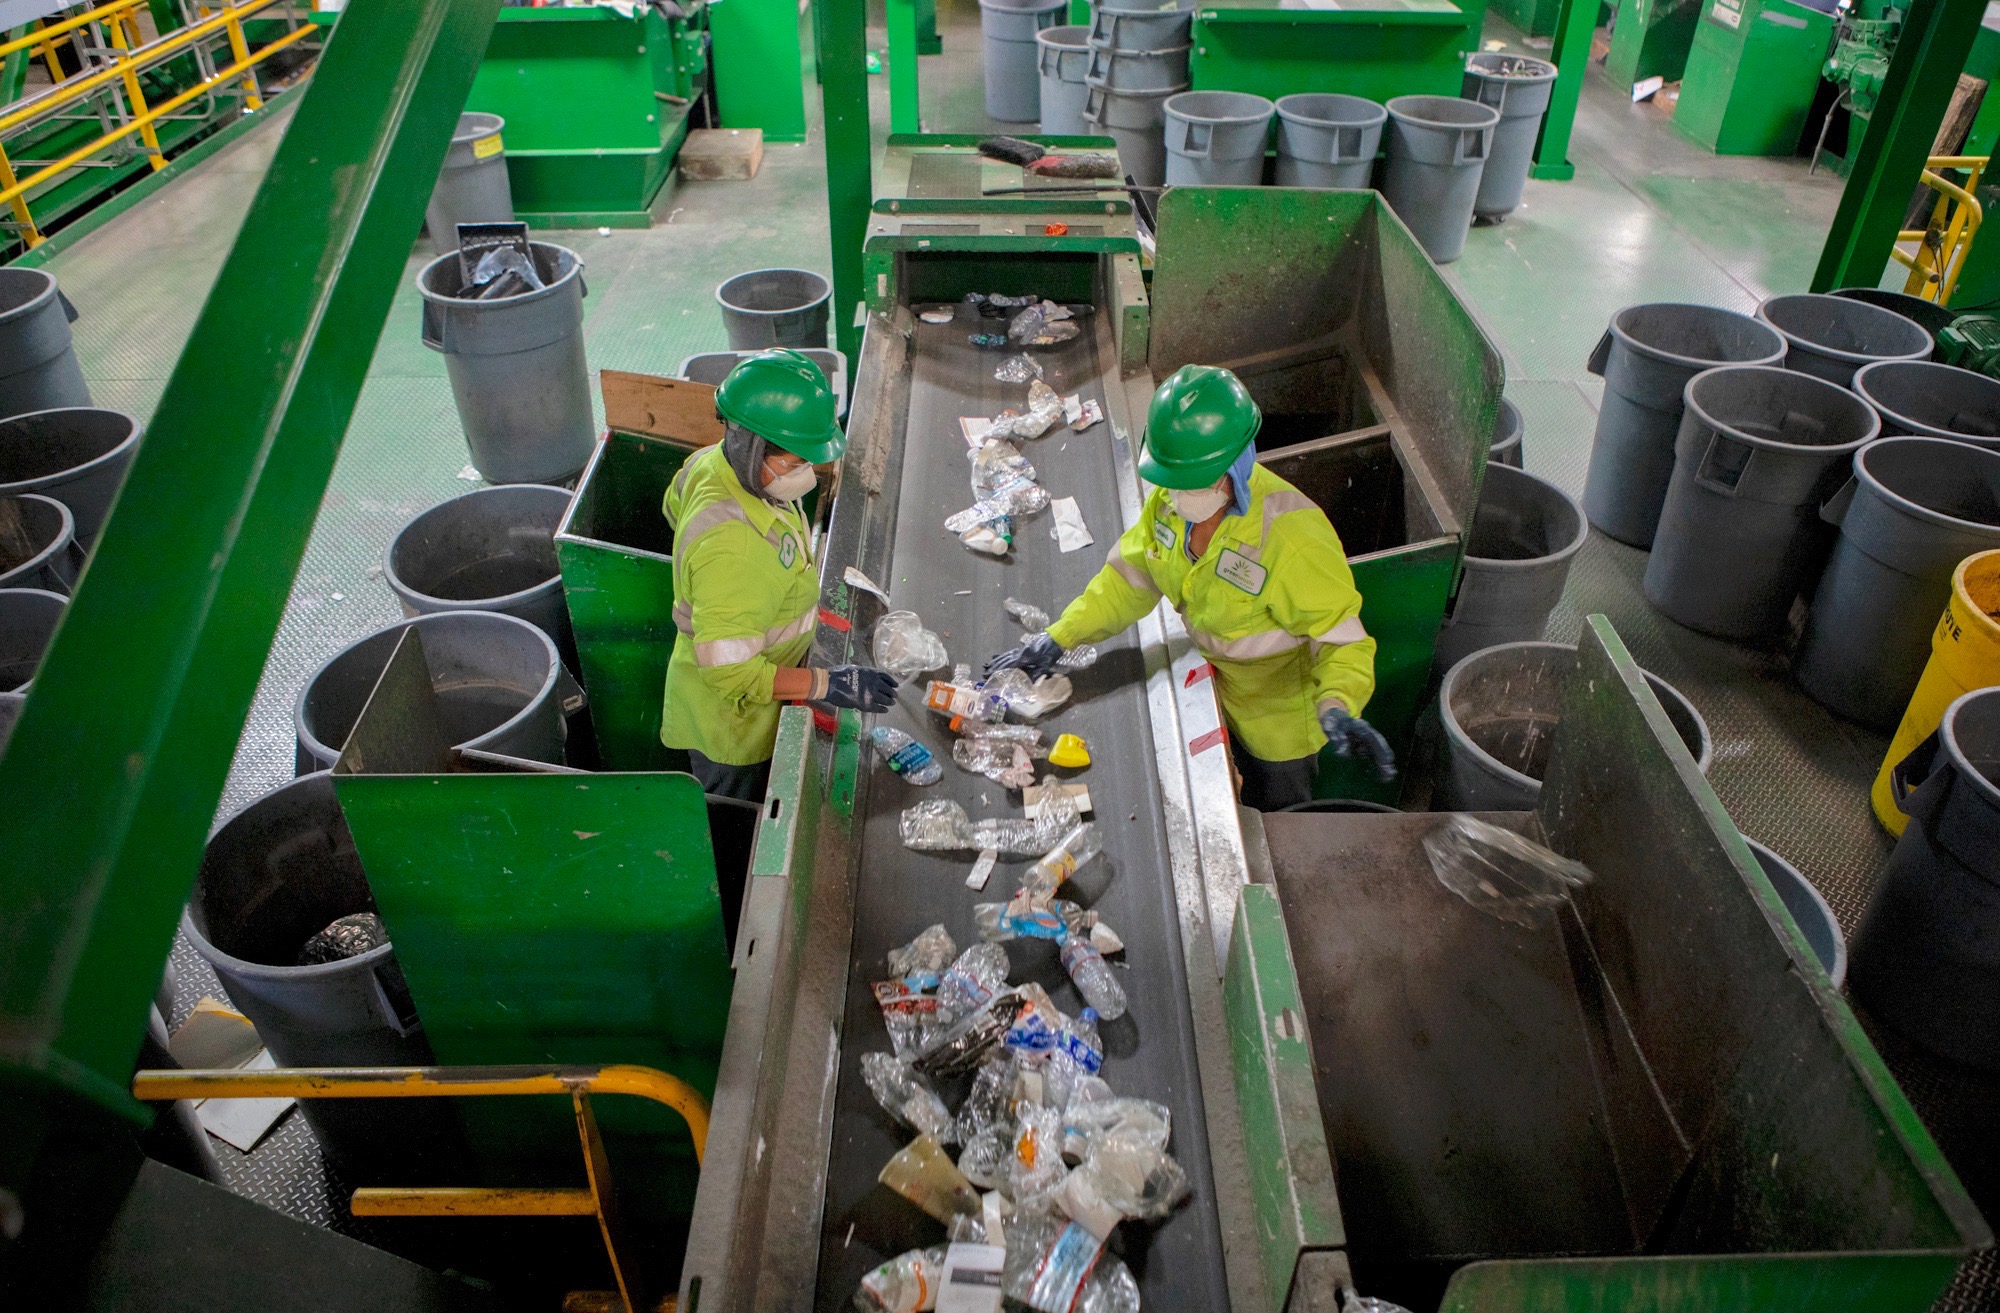 GreenWaste Recovery employees sort through plastic items on a conveyor belt at the company’s materials recovery facility in San Jose, California. Photo by Anne Wernikoff for CalMatters, July 29, 2019.